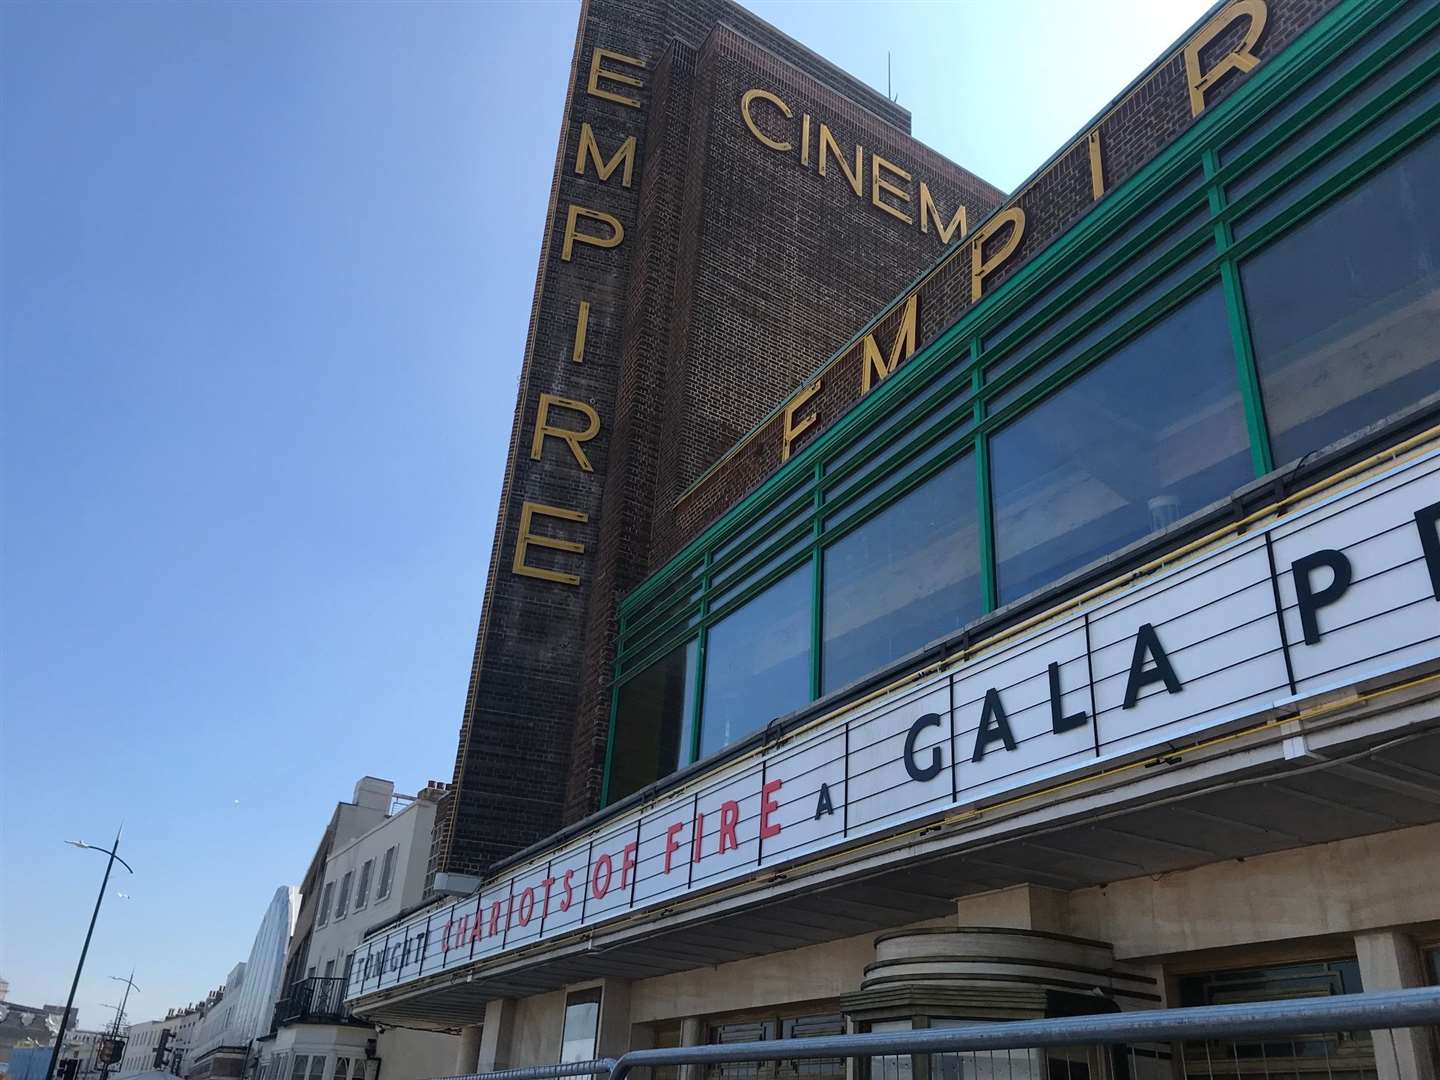 The Empire of Light was largely filmed in Margate